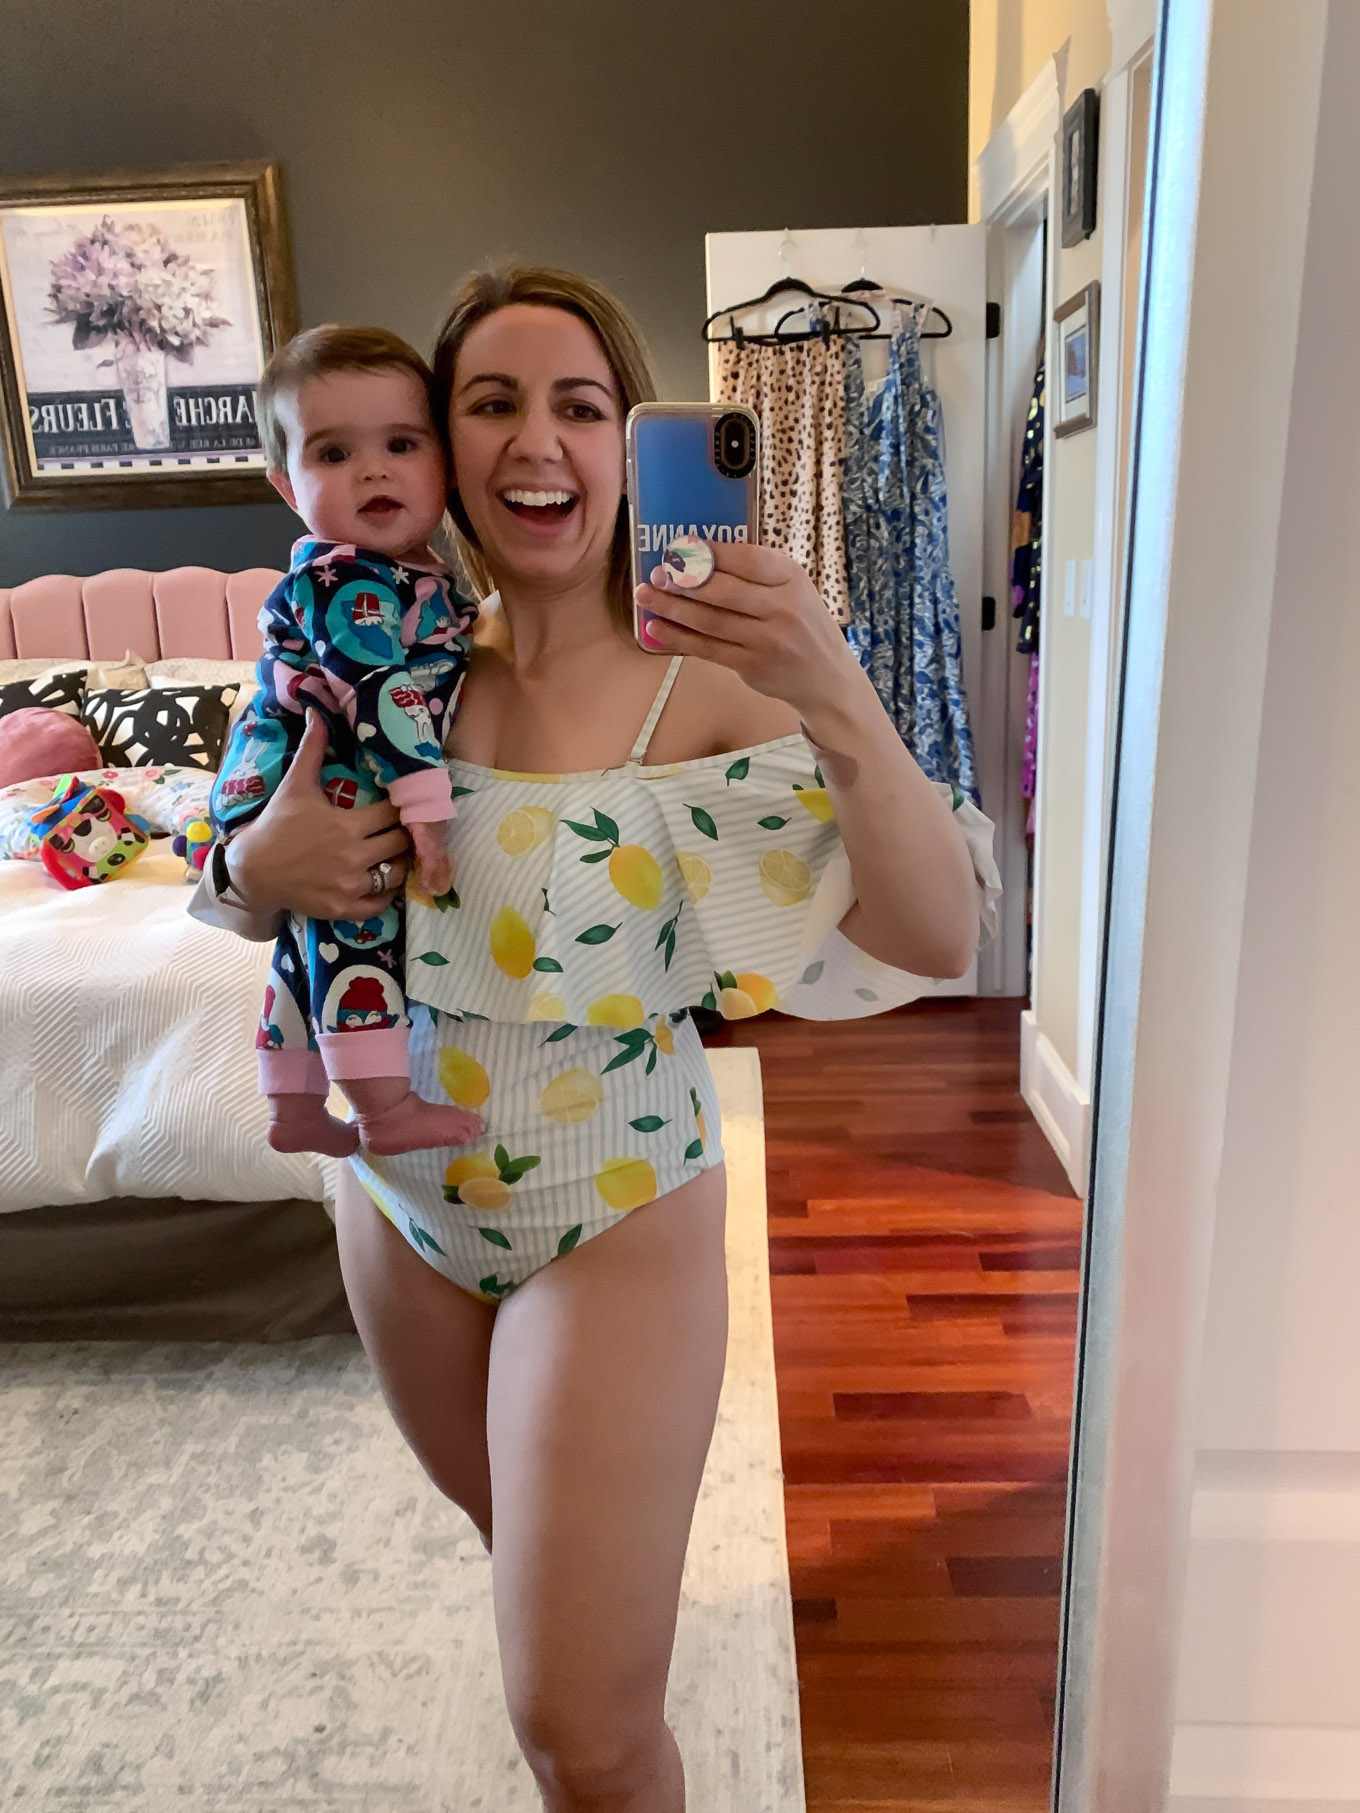 At Home Swimwear Try On by popular Chicago fashion blog, Glass of Glam: image of a woman standing in her master bedroom and wearing a SheIn SHEIN Random Flounce Foldover Off Shoulder One Piece Swimsuit.